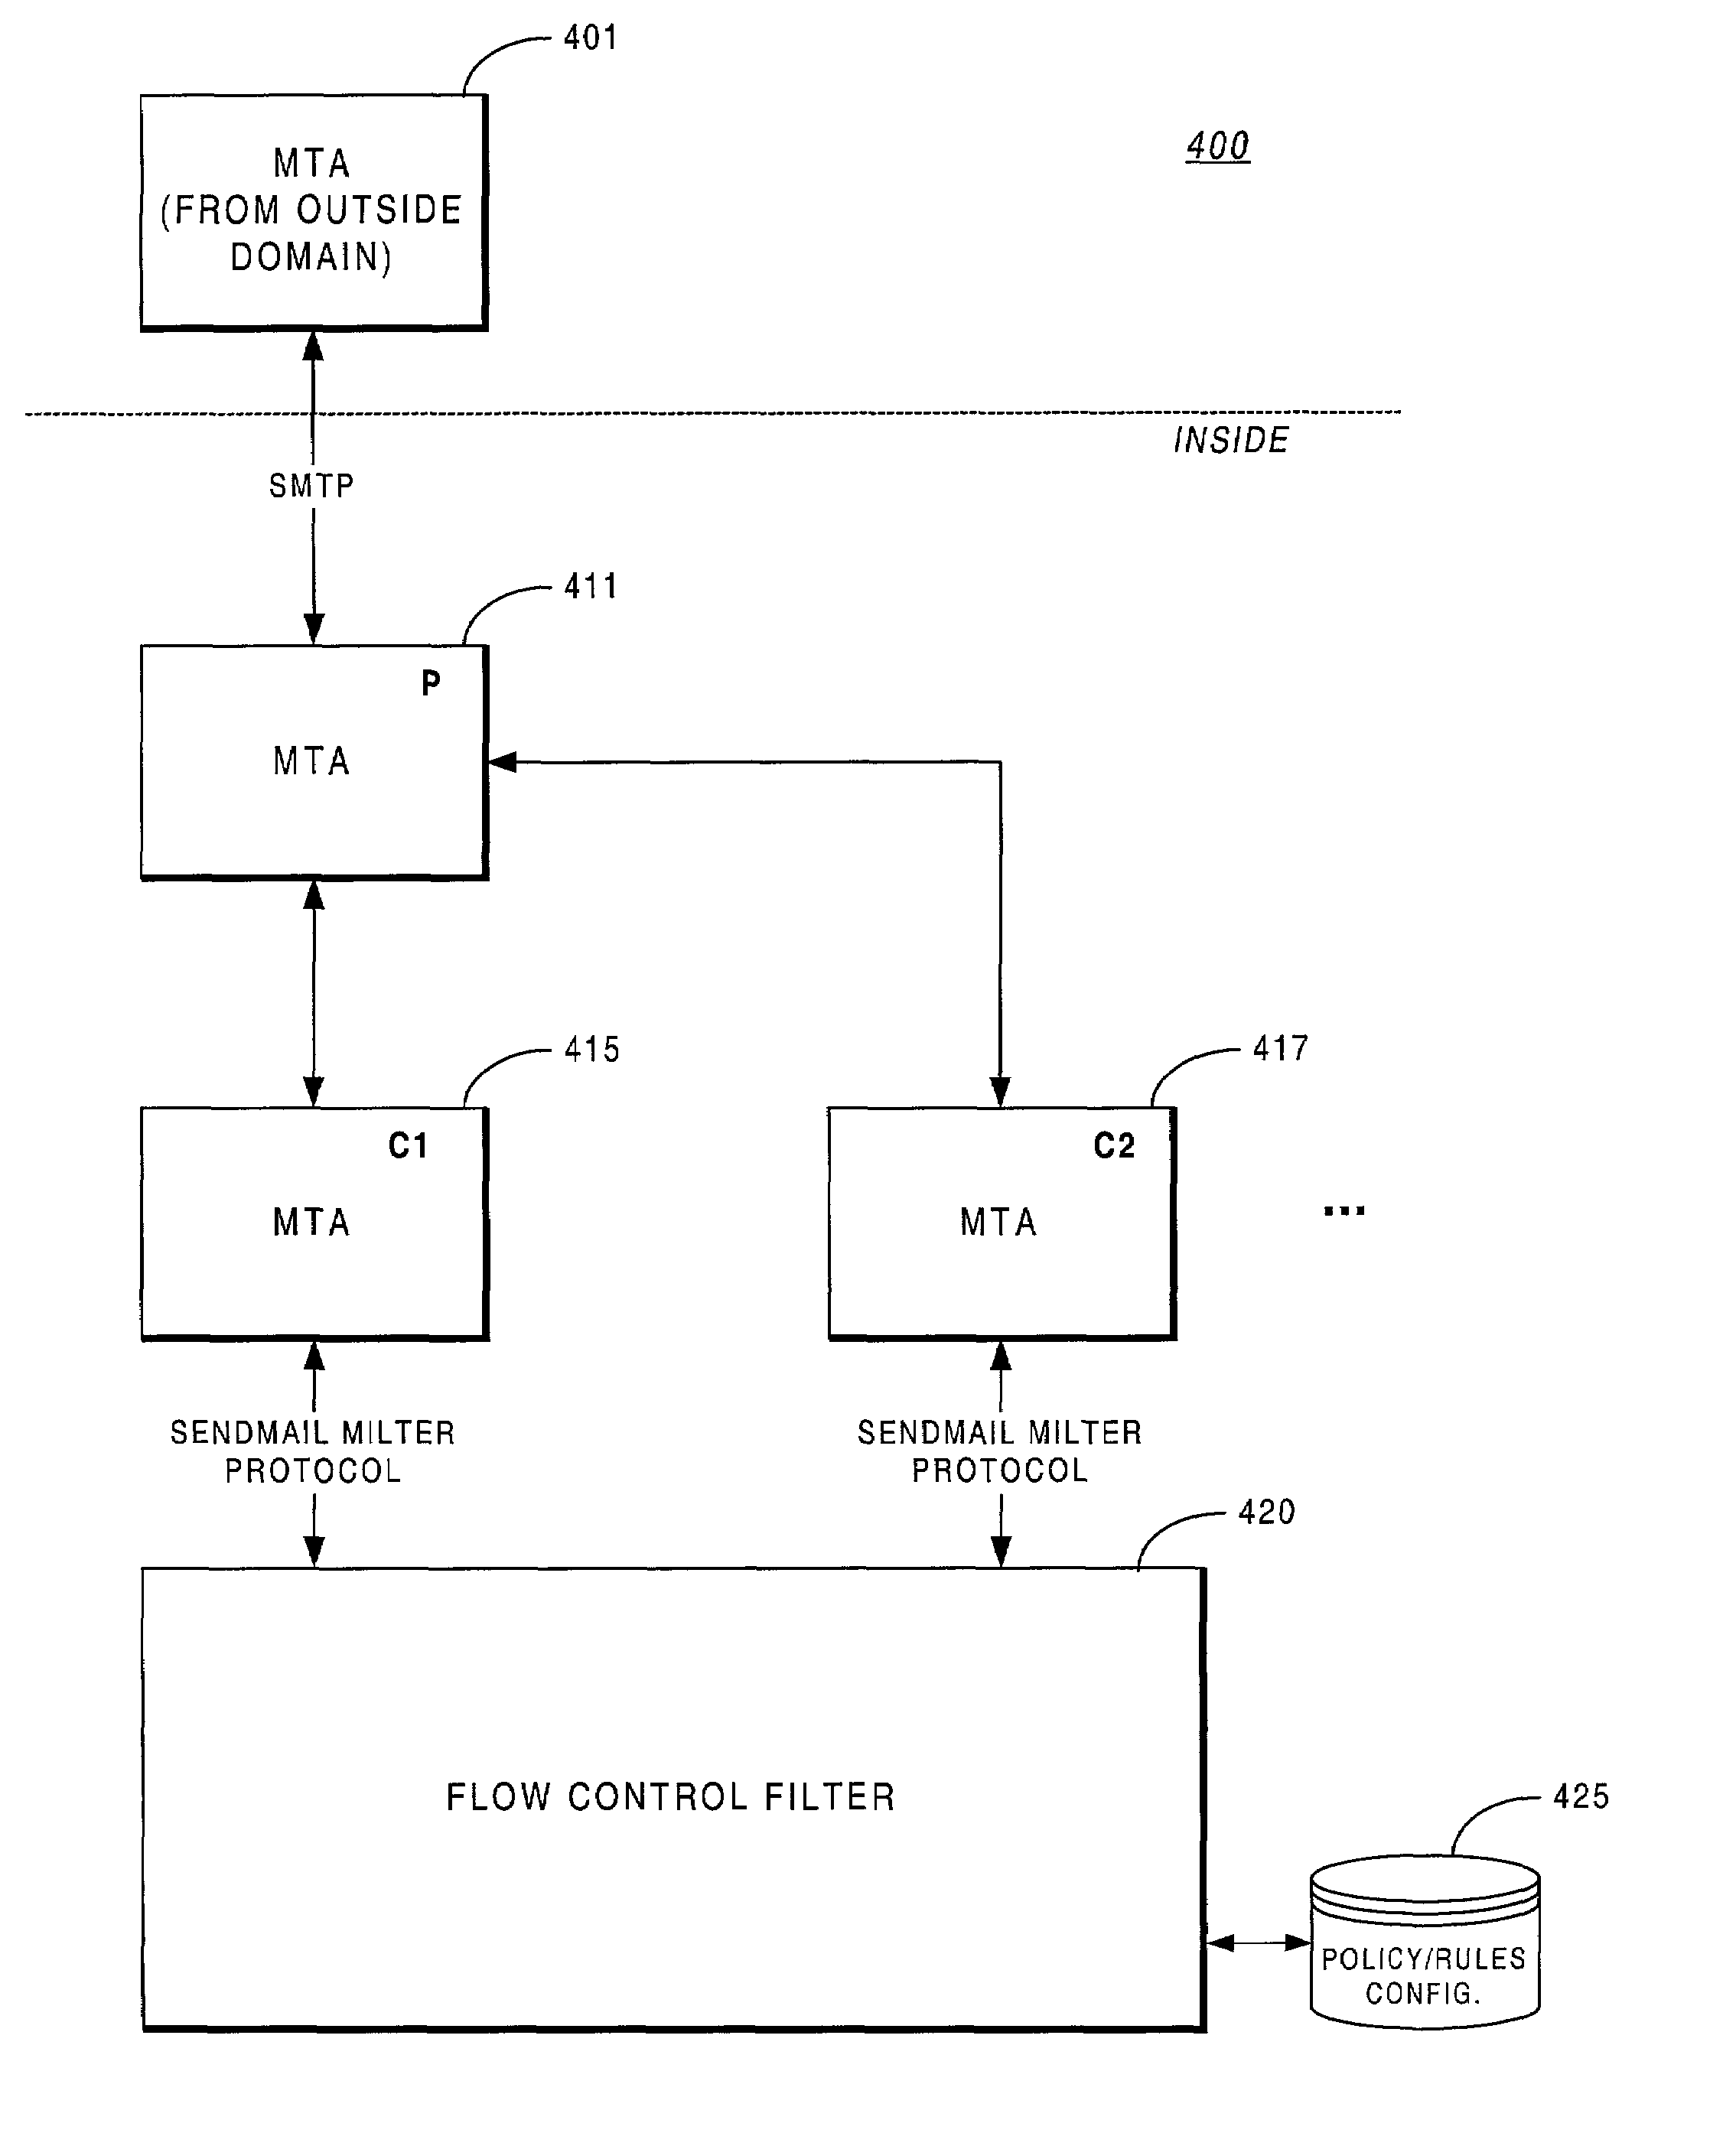 E-mail system providing filtering methodology on a per-domain basis